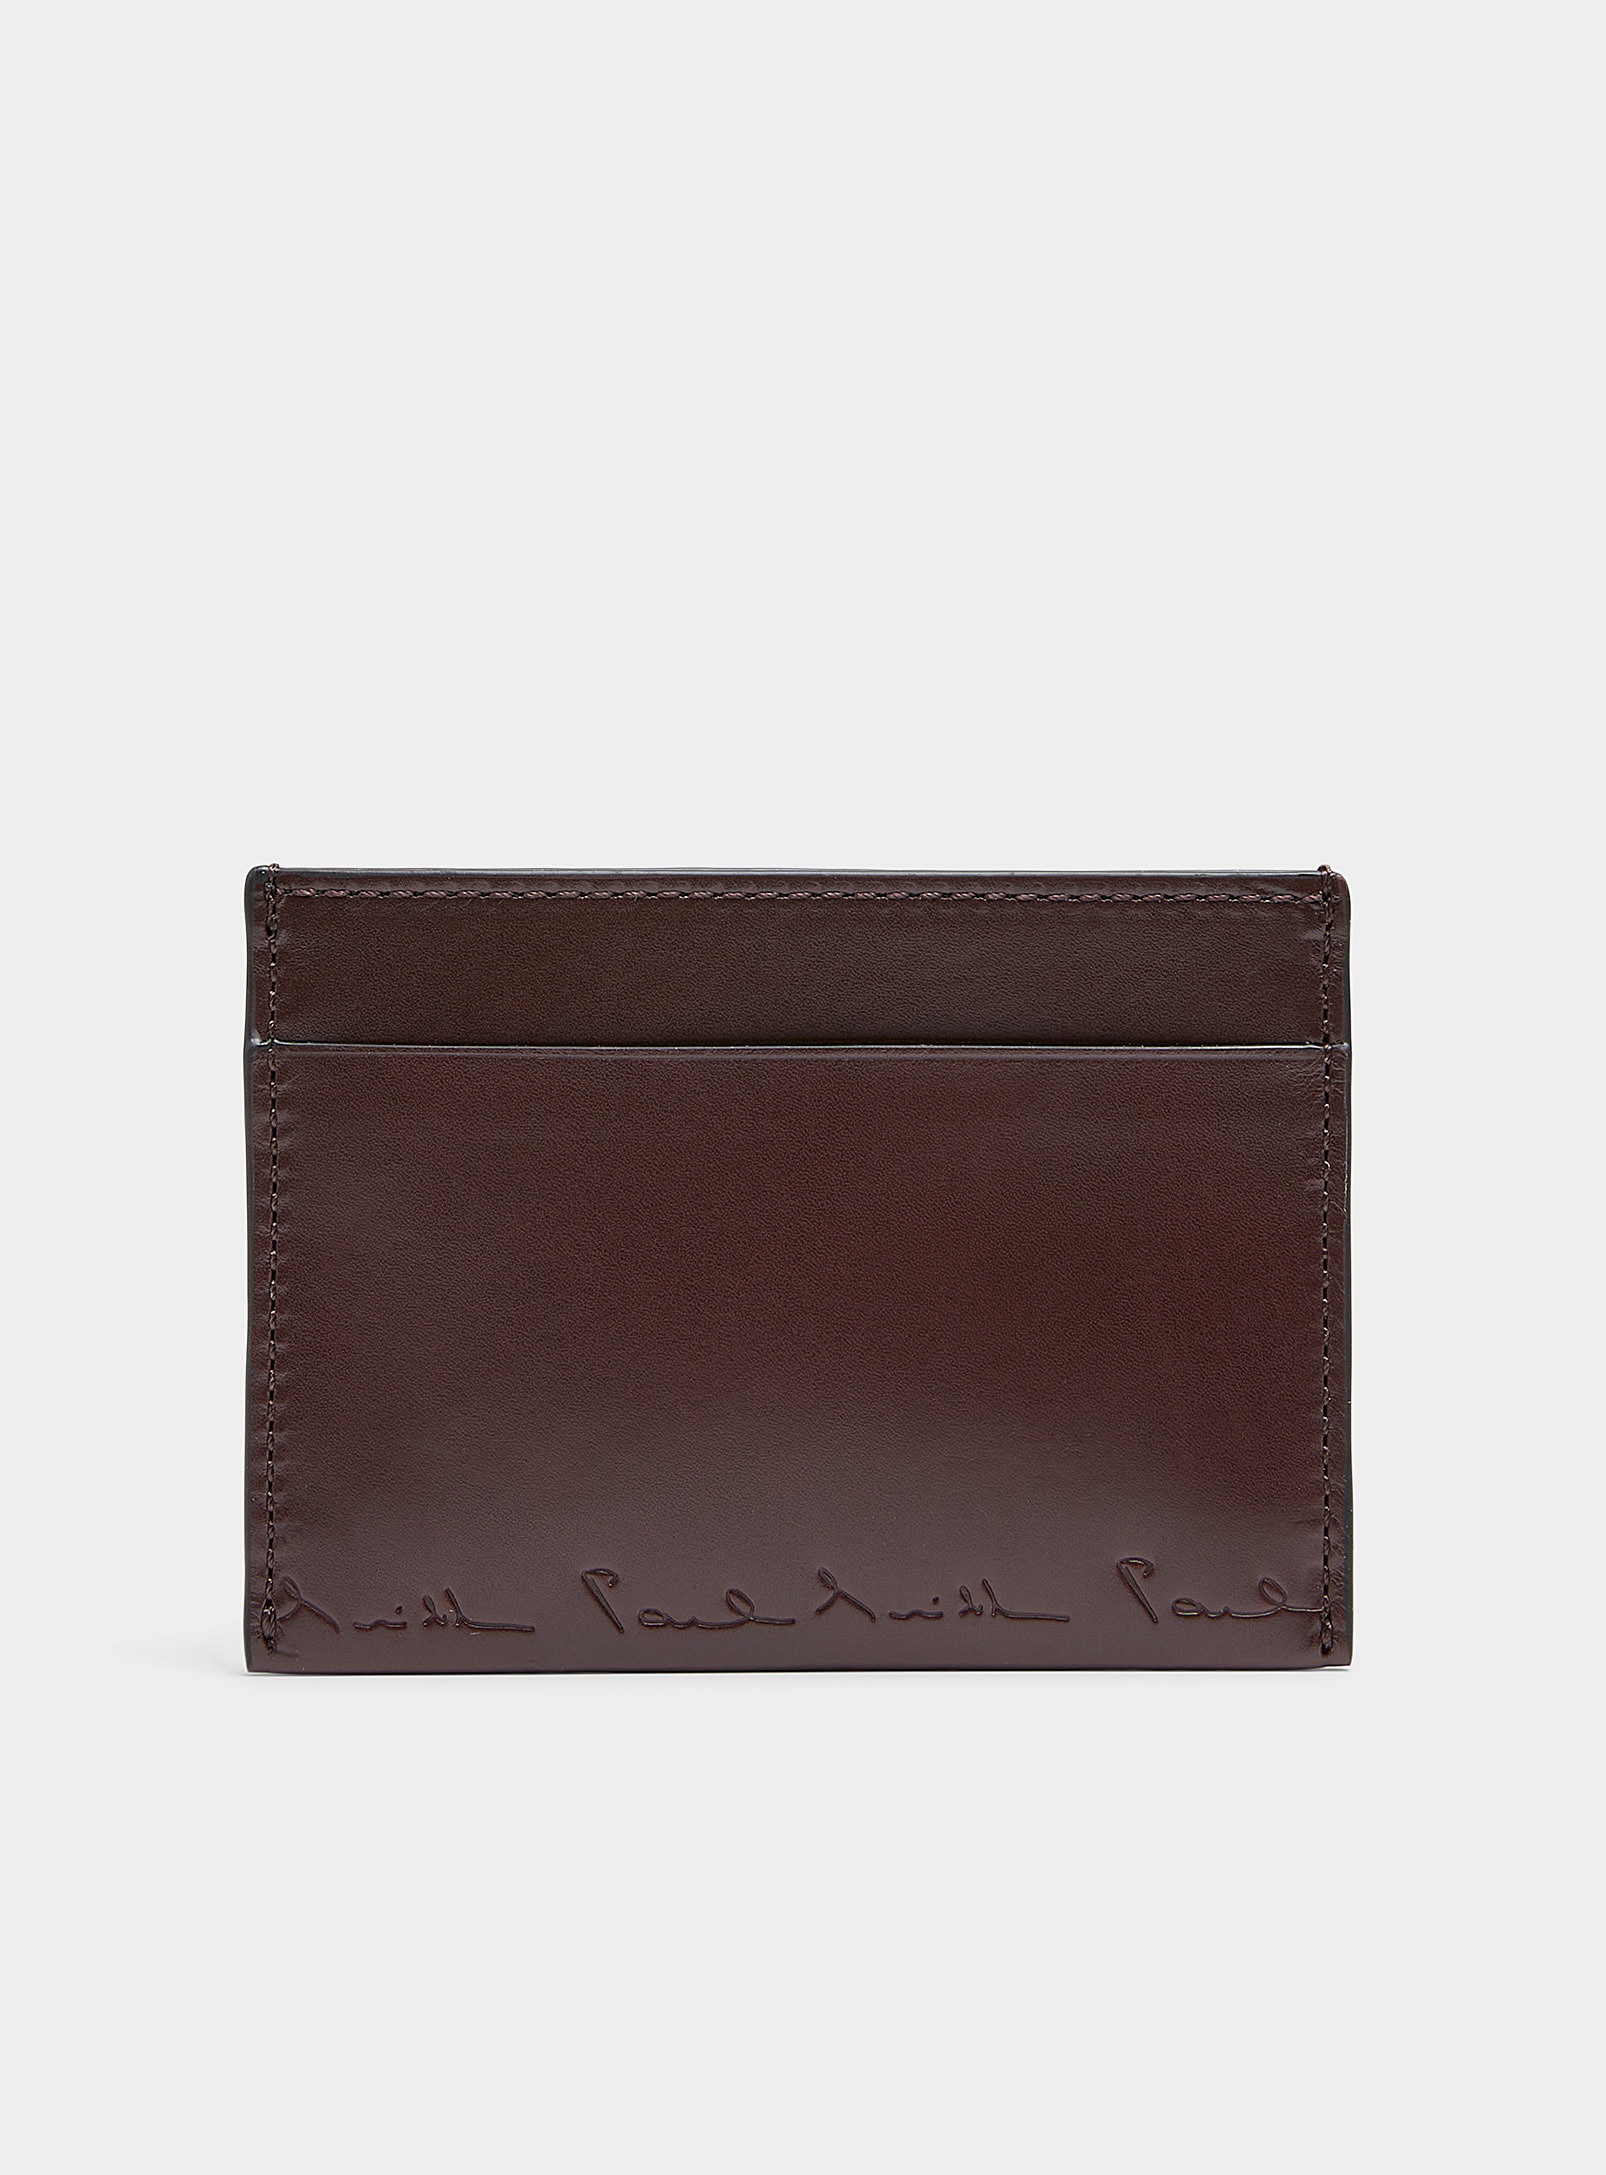 Paul Smith - Men's Brown smooth leather card holder